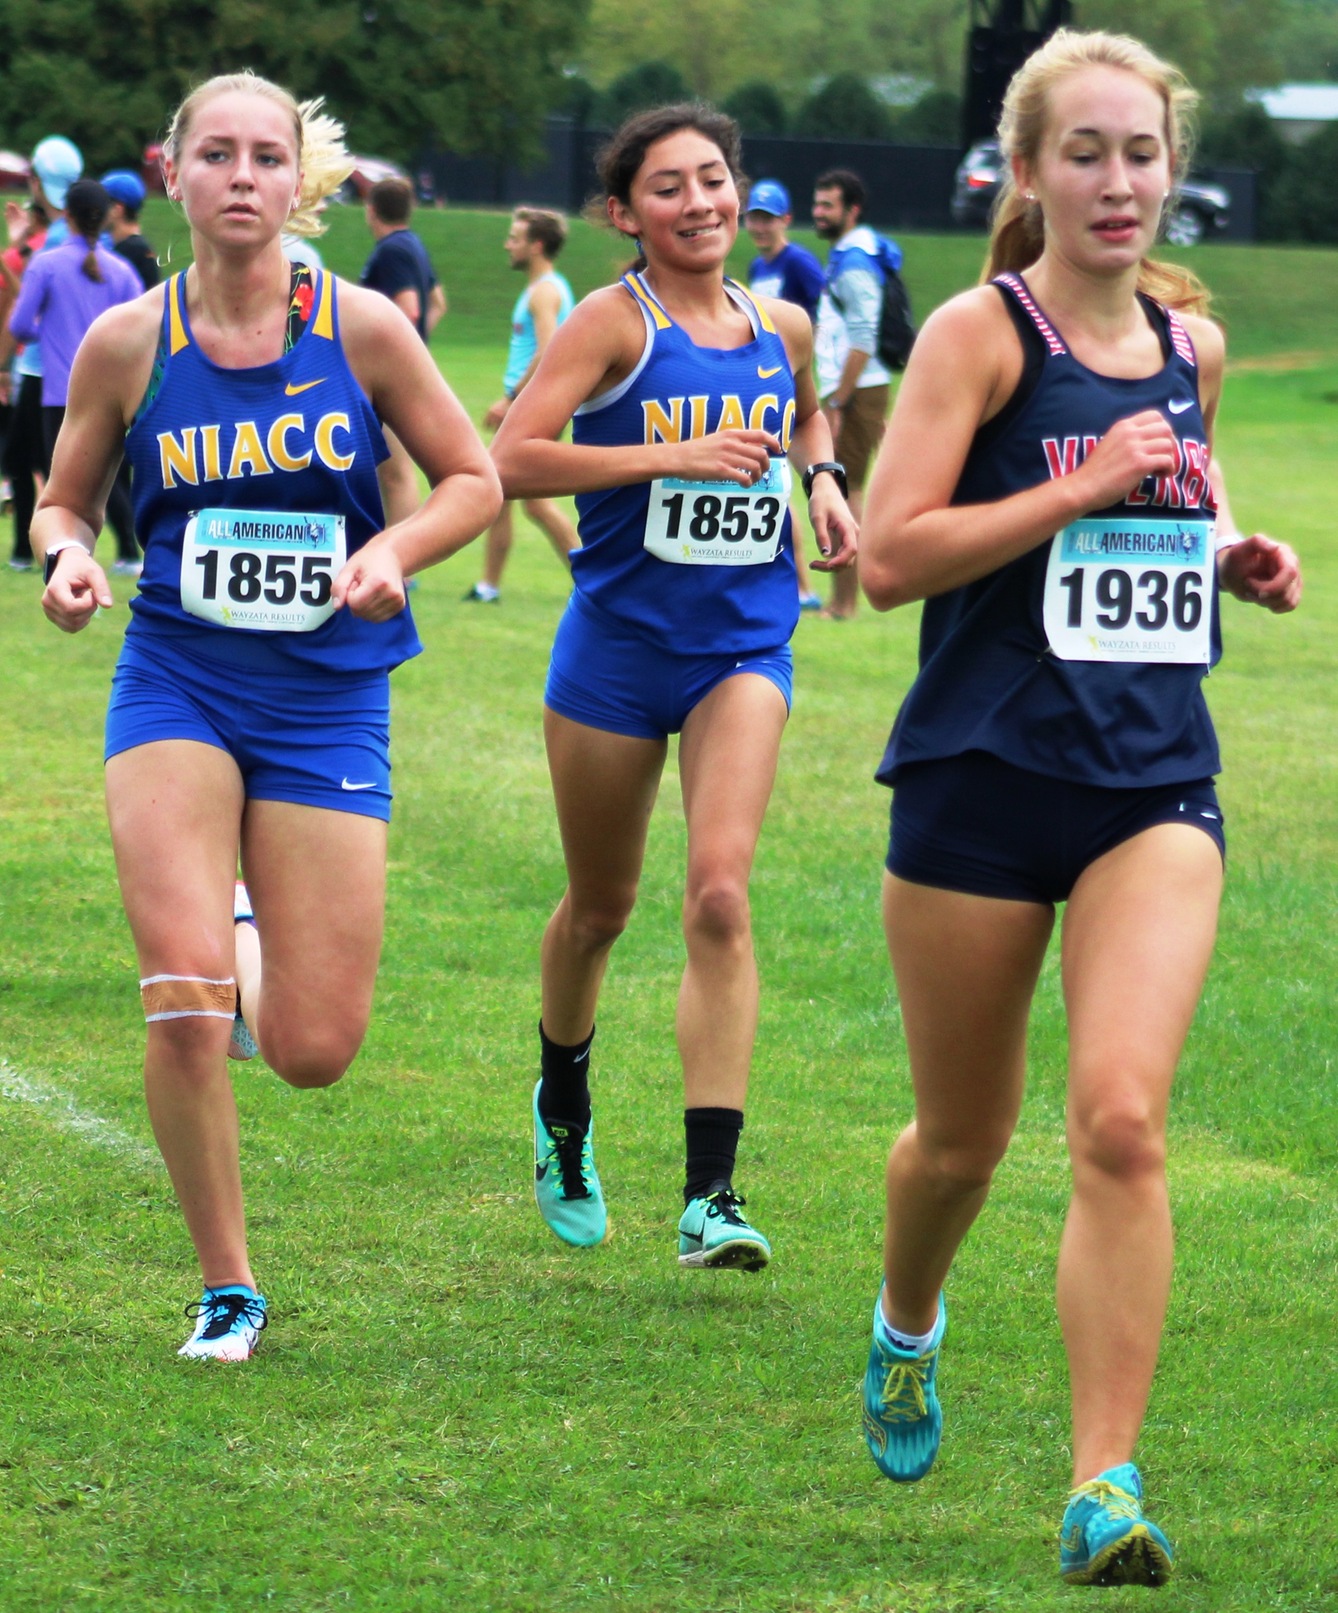 NIACC's Cecelia Hemsworth (left) and Miricle Corbo run at the Luther College All-American meet in September.